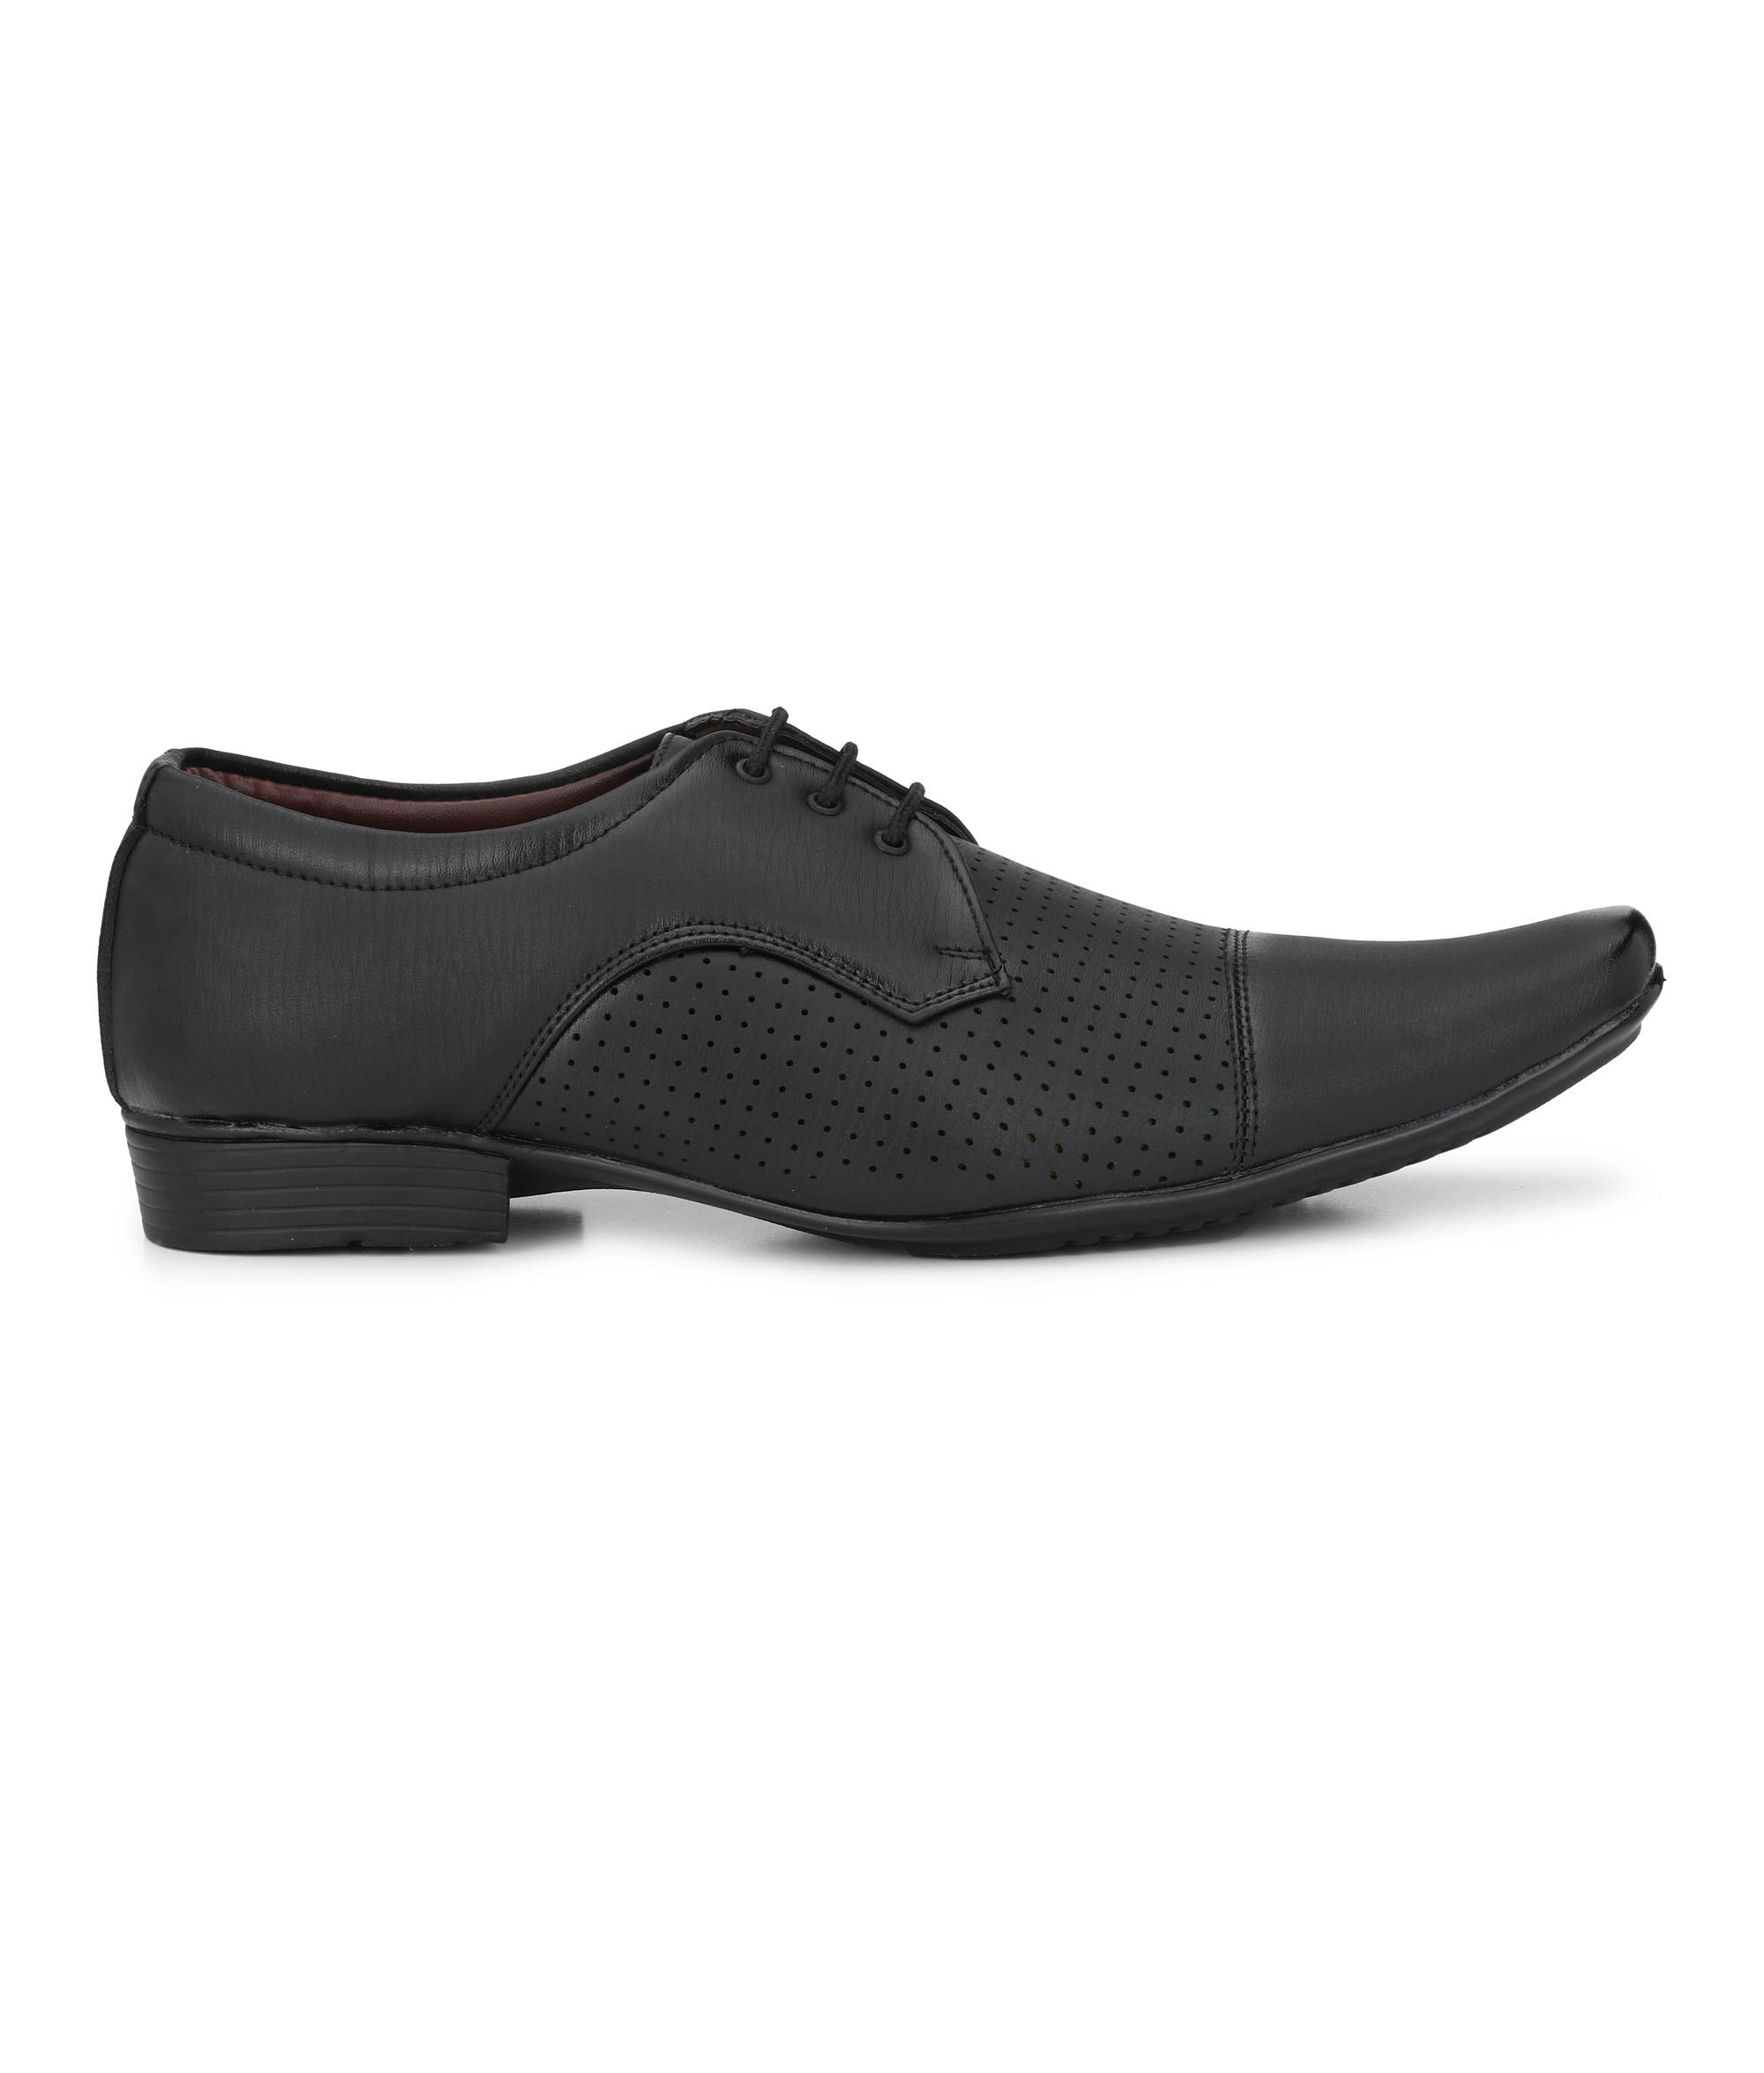 Buy Men's Black Lace-up Formal Shoes Online @ ₹499 from ShopClues